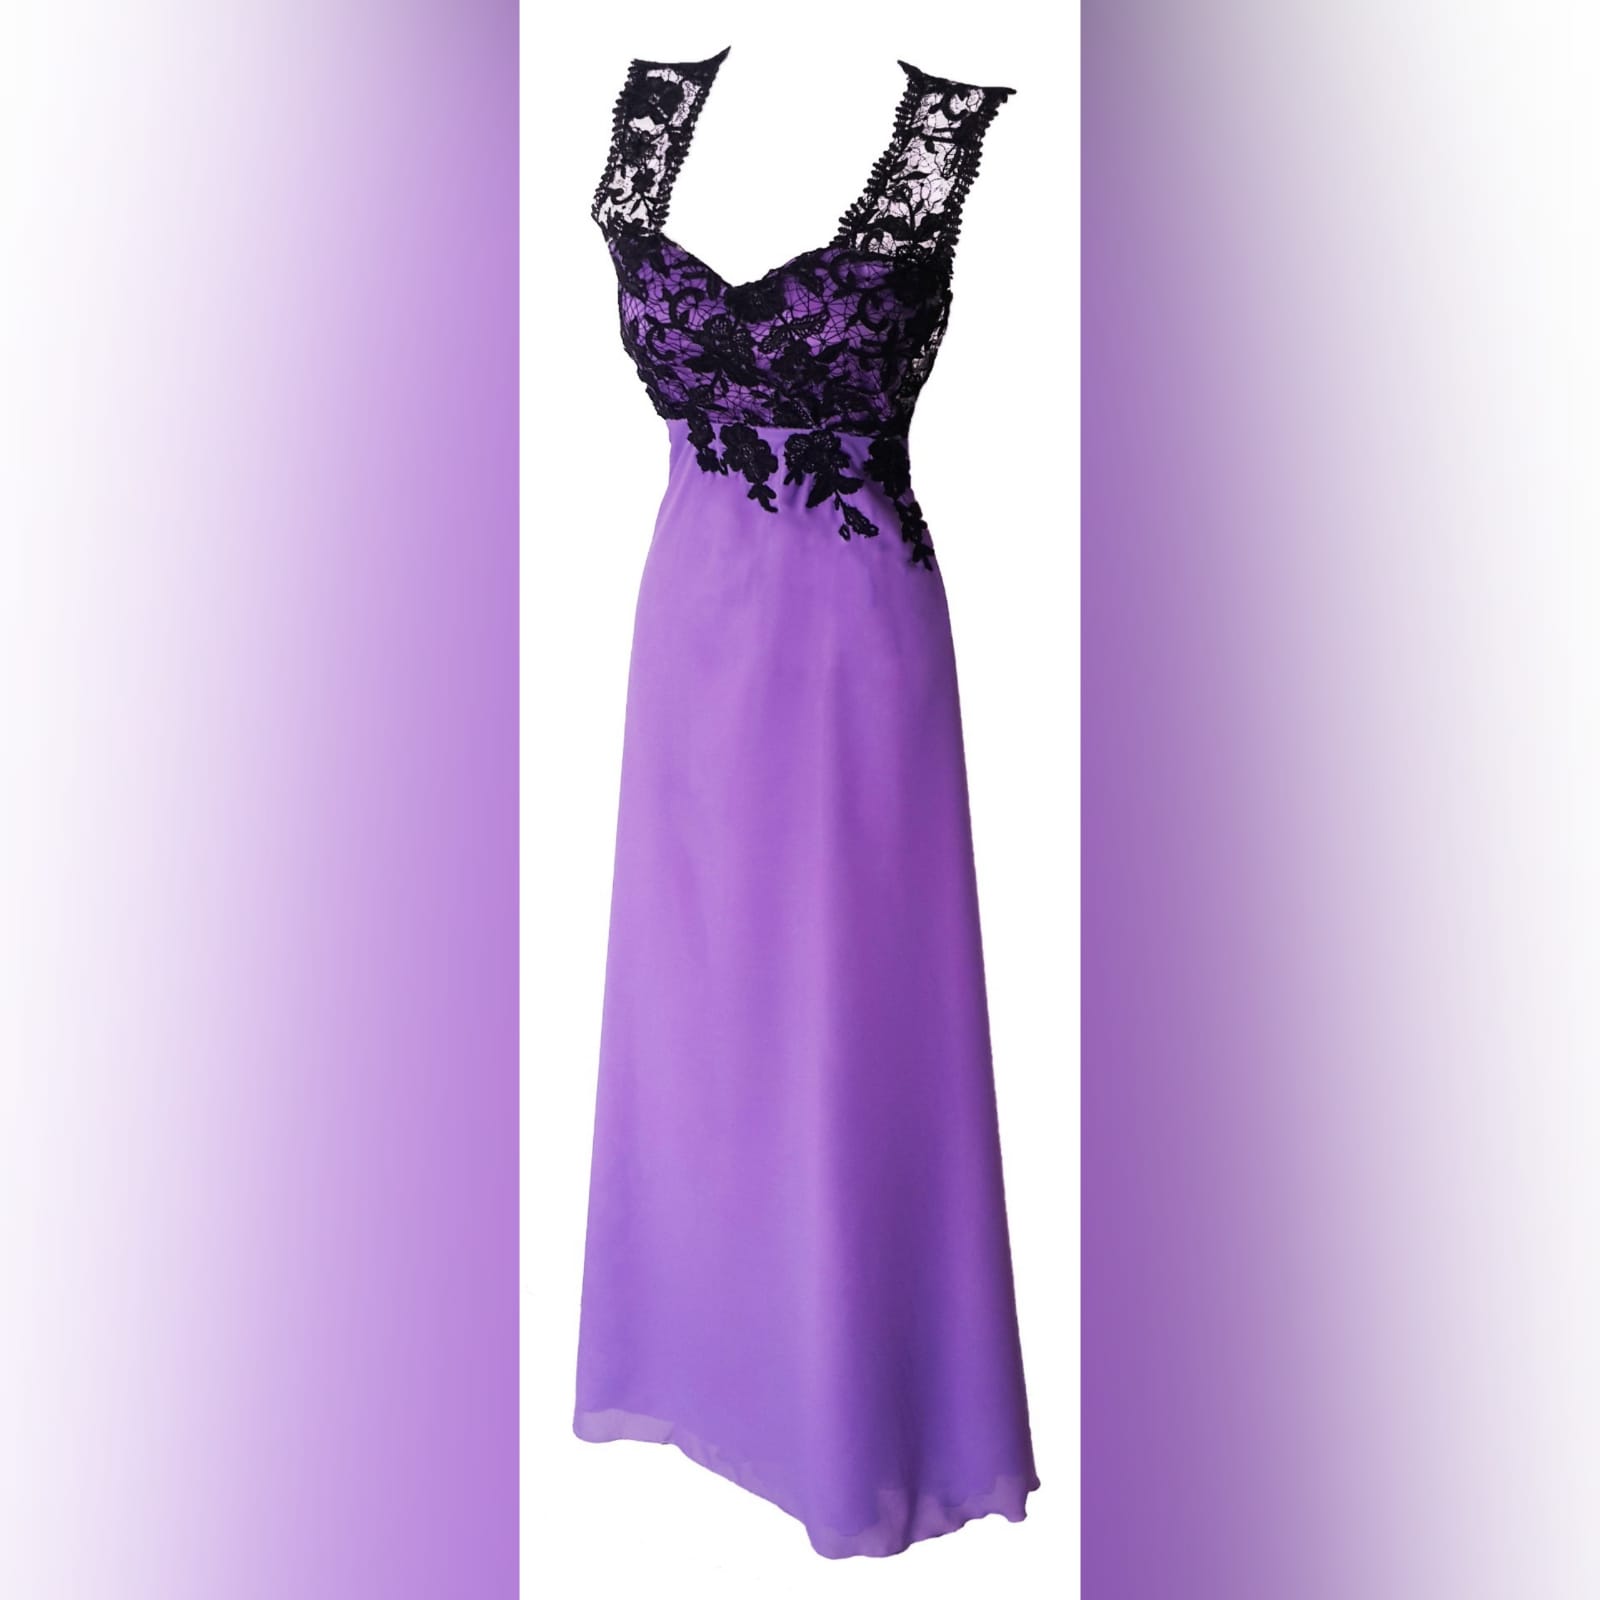 Lilac and black lace prom dress 3 lilac and black lace prom dress. Bodice with applique lace and a sweetheart neckline. With sheer lace shoulder straps and sheer lace on the back. Long and flowy prom dress.